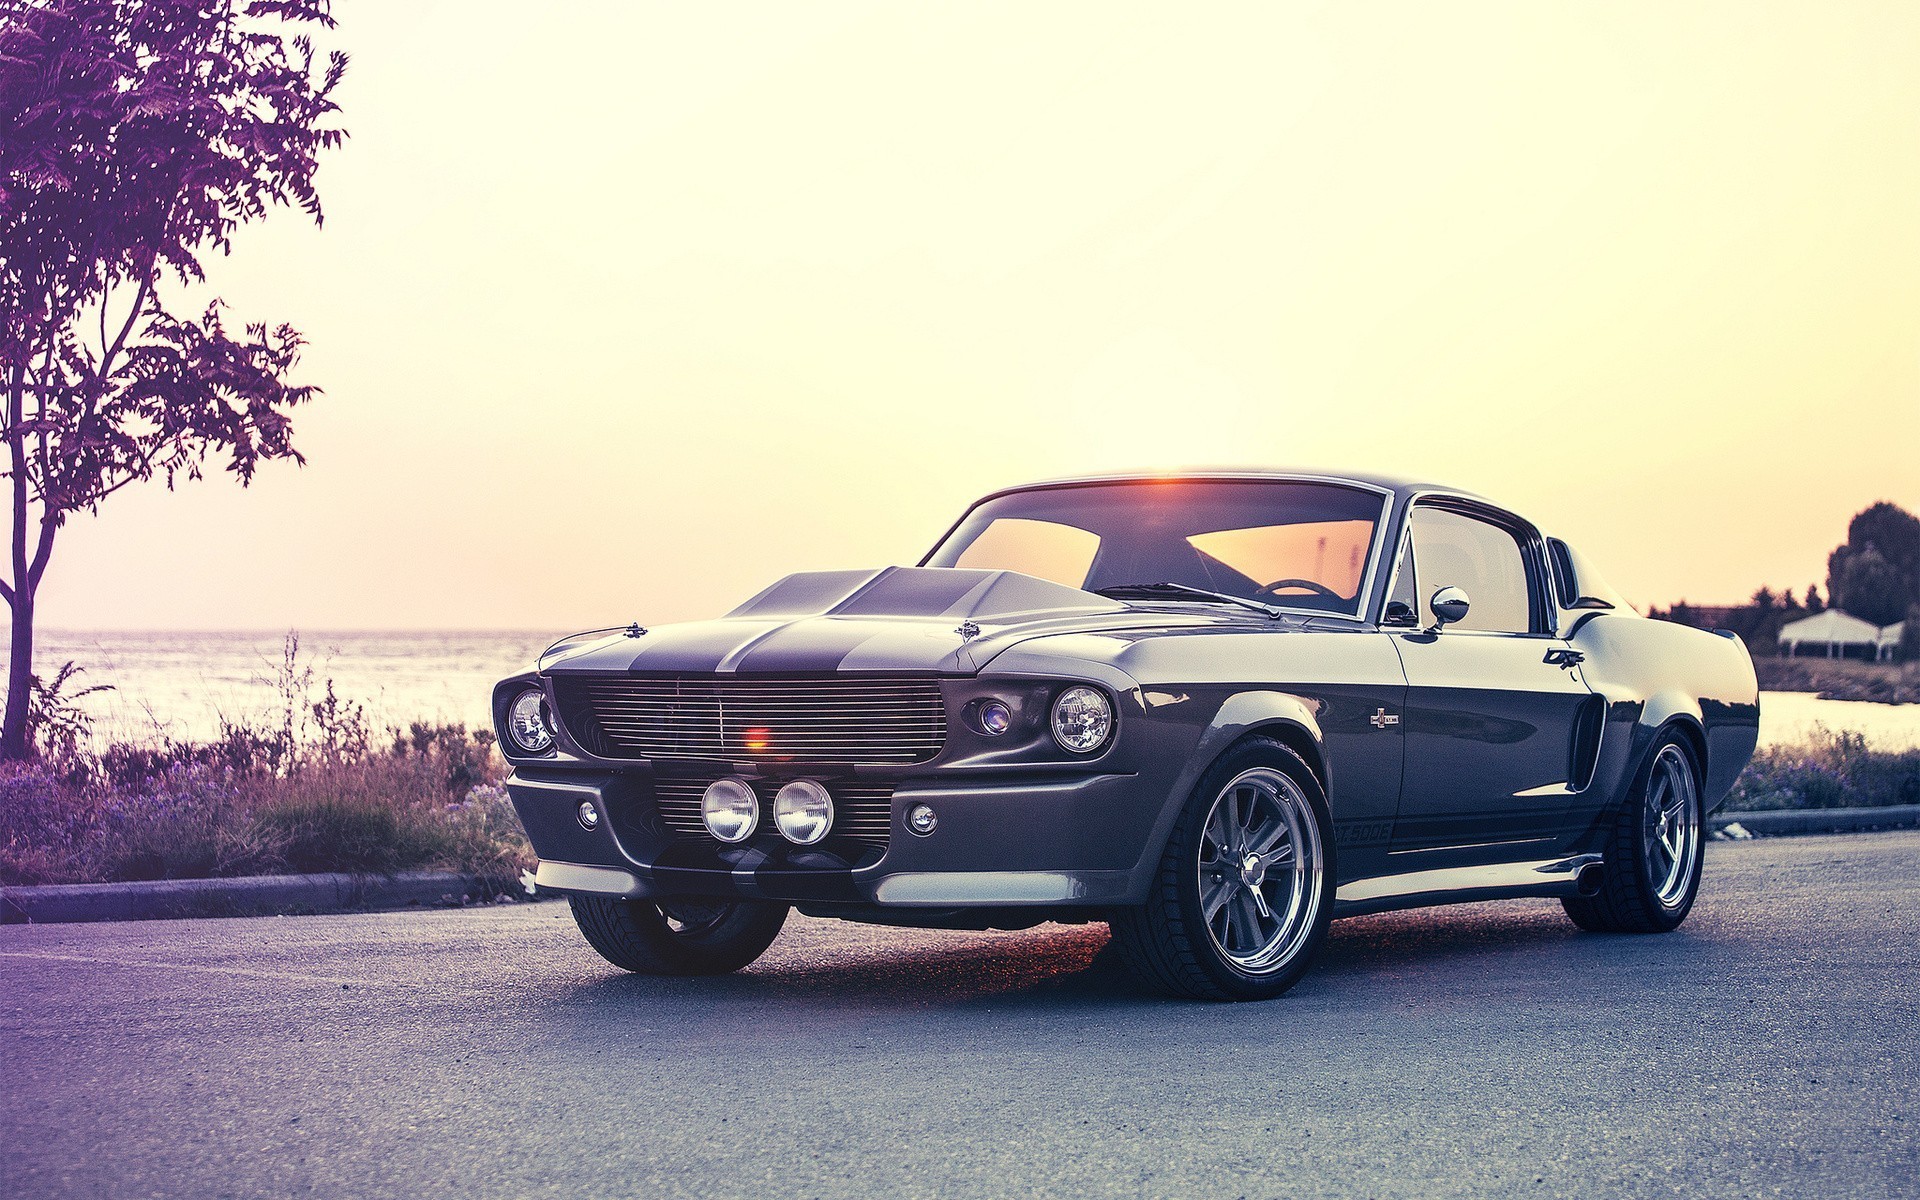 Ford Mustang, Shelby, Shelby GT, Car, Old Car, Muscle Cars, Ford Mustang Shelby Wallpaper